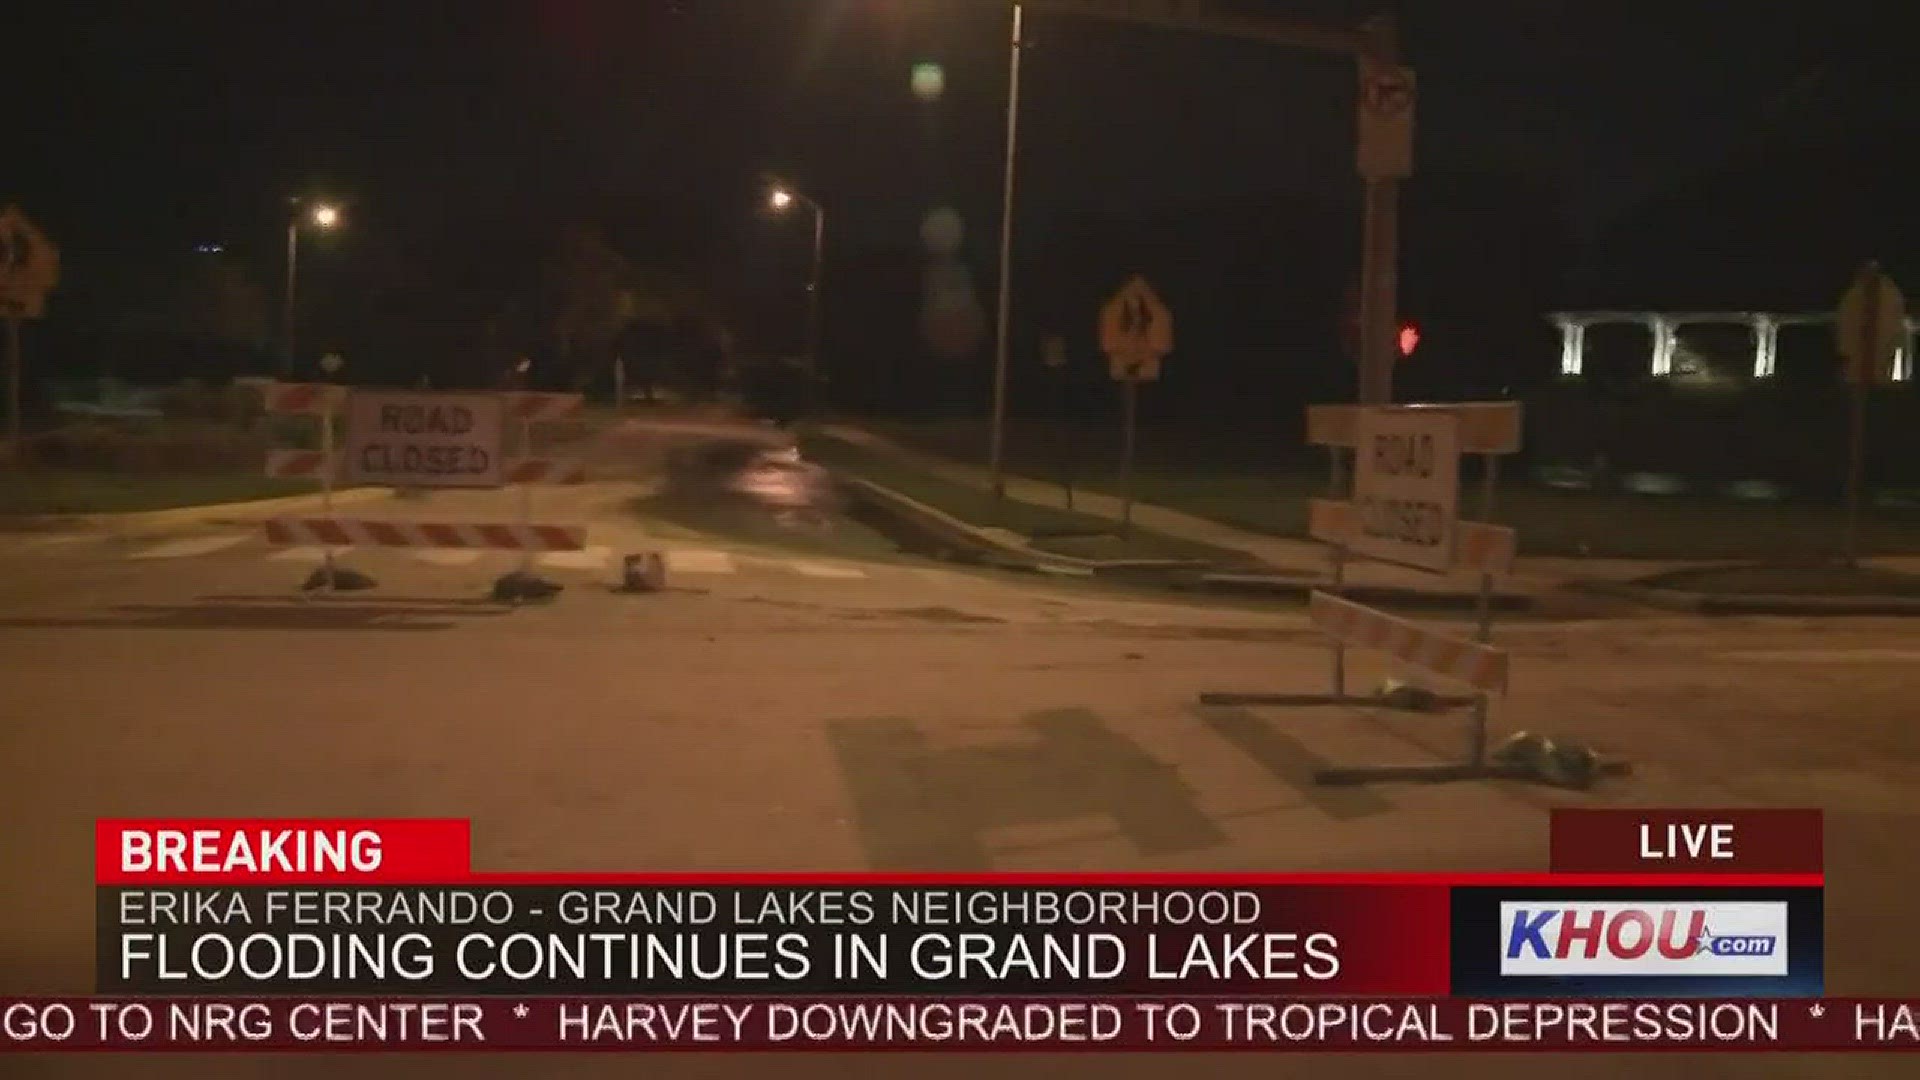 Officials expect the Grand Lakes neighborhood to flood as controlled releases of Barker reservoir continue.